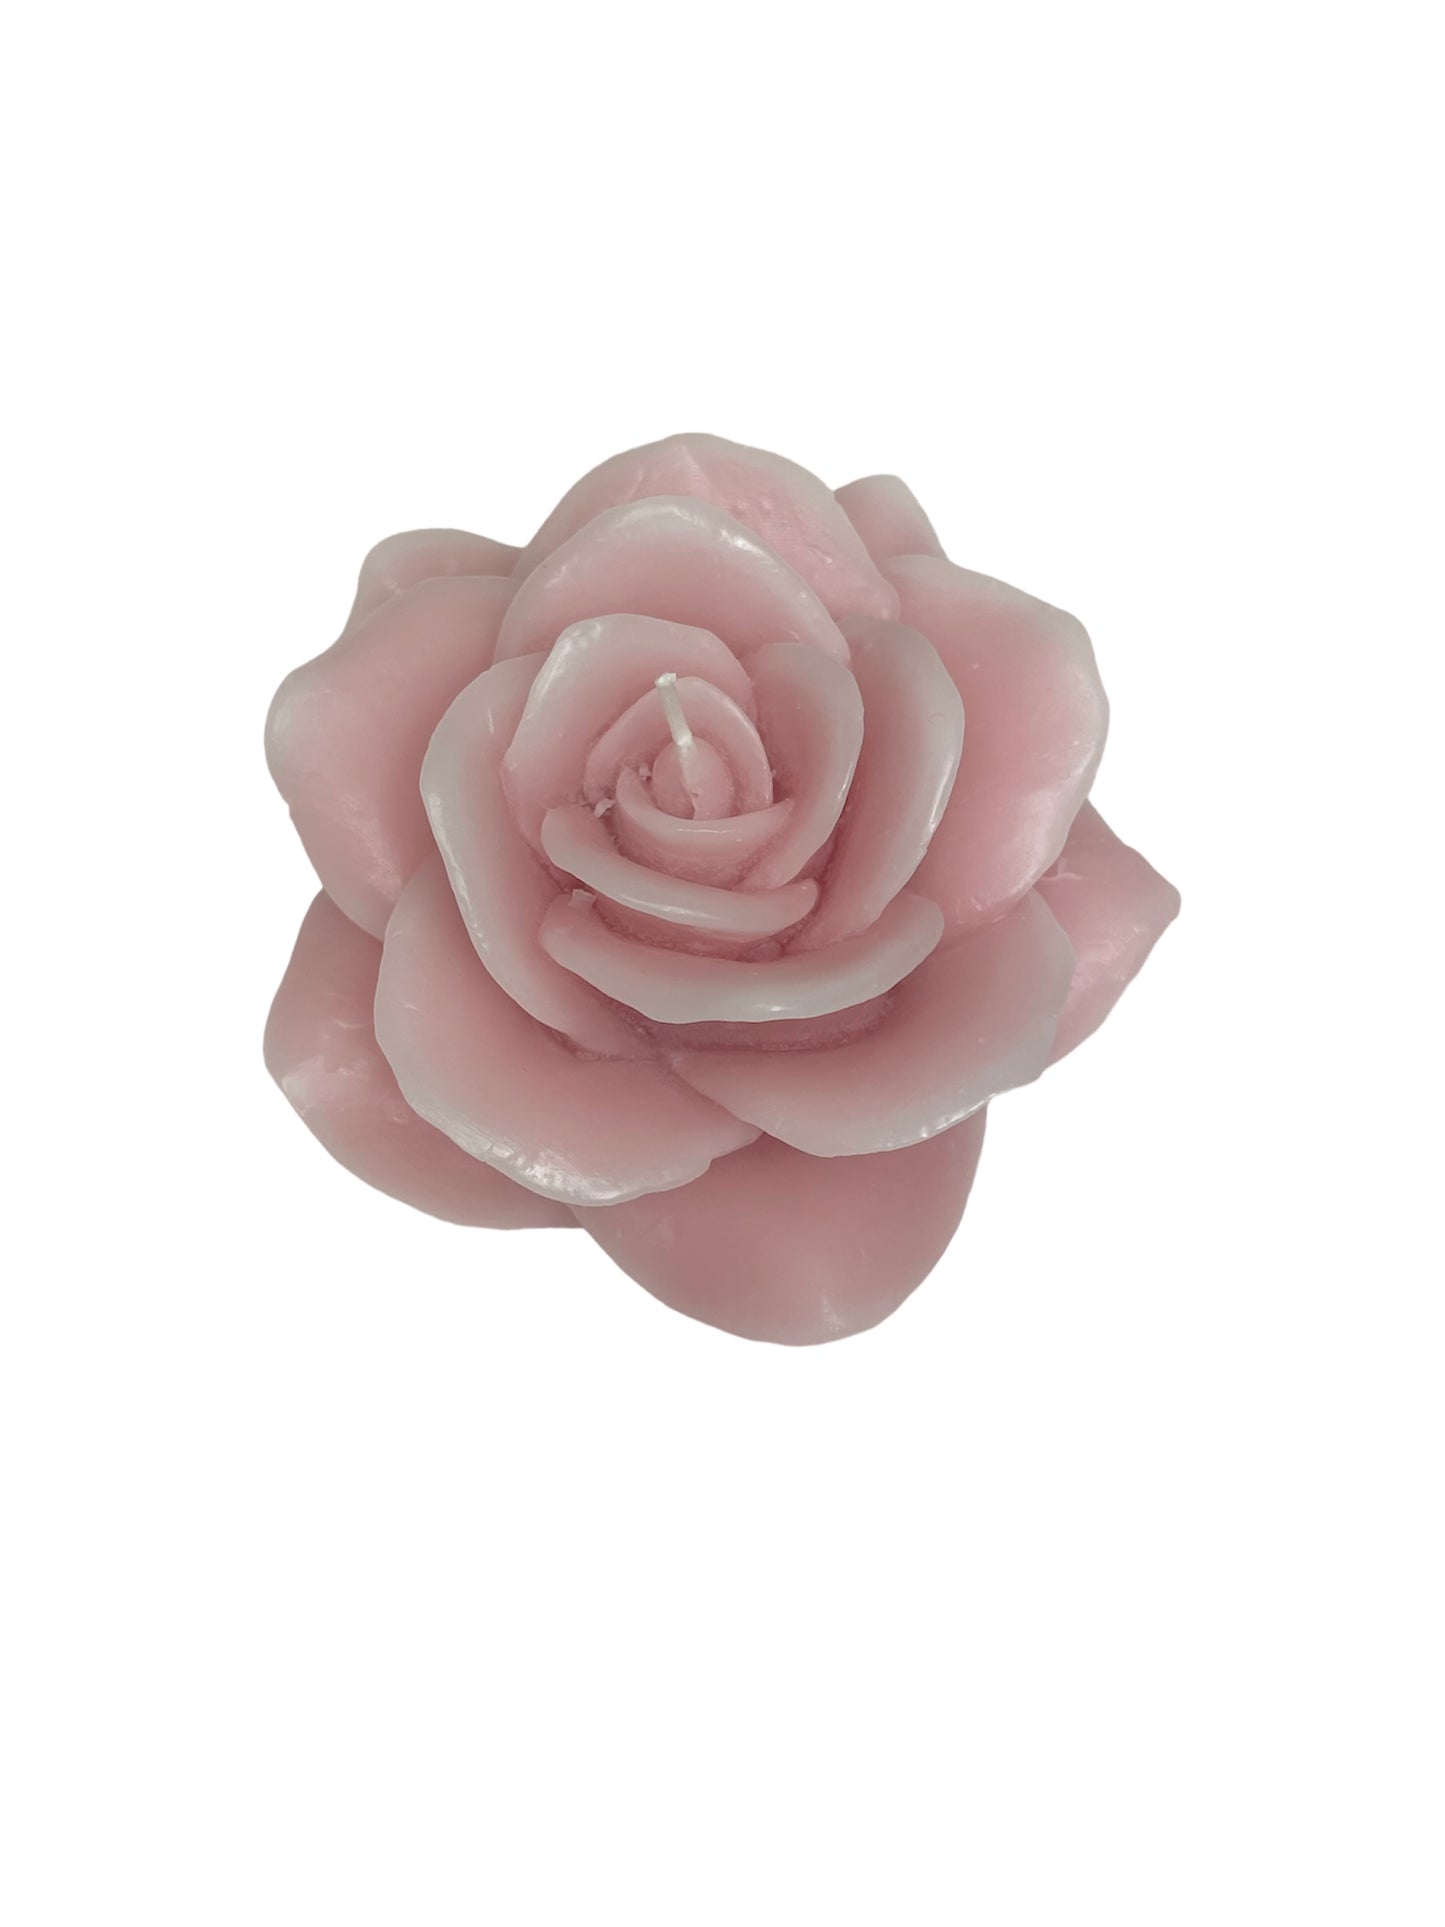 Rose scented candle